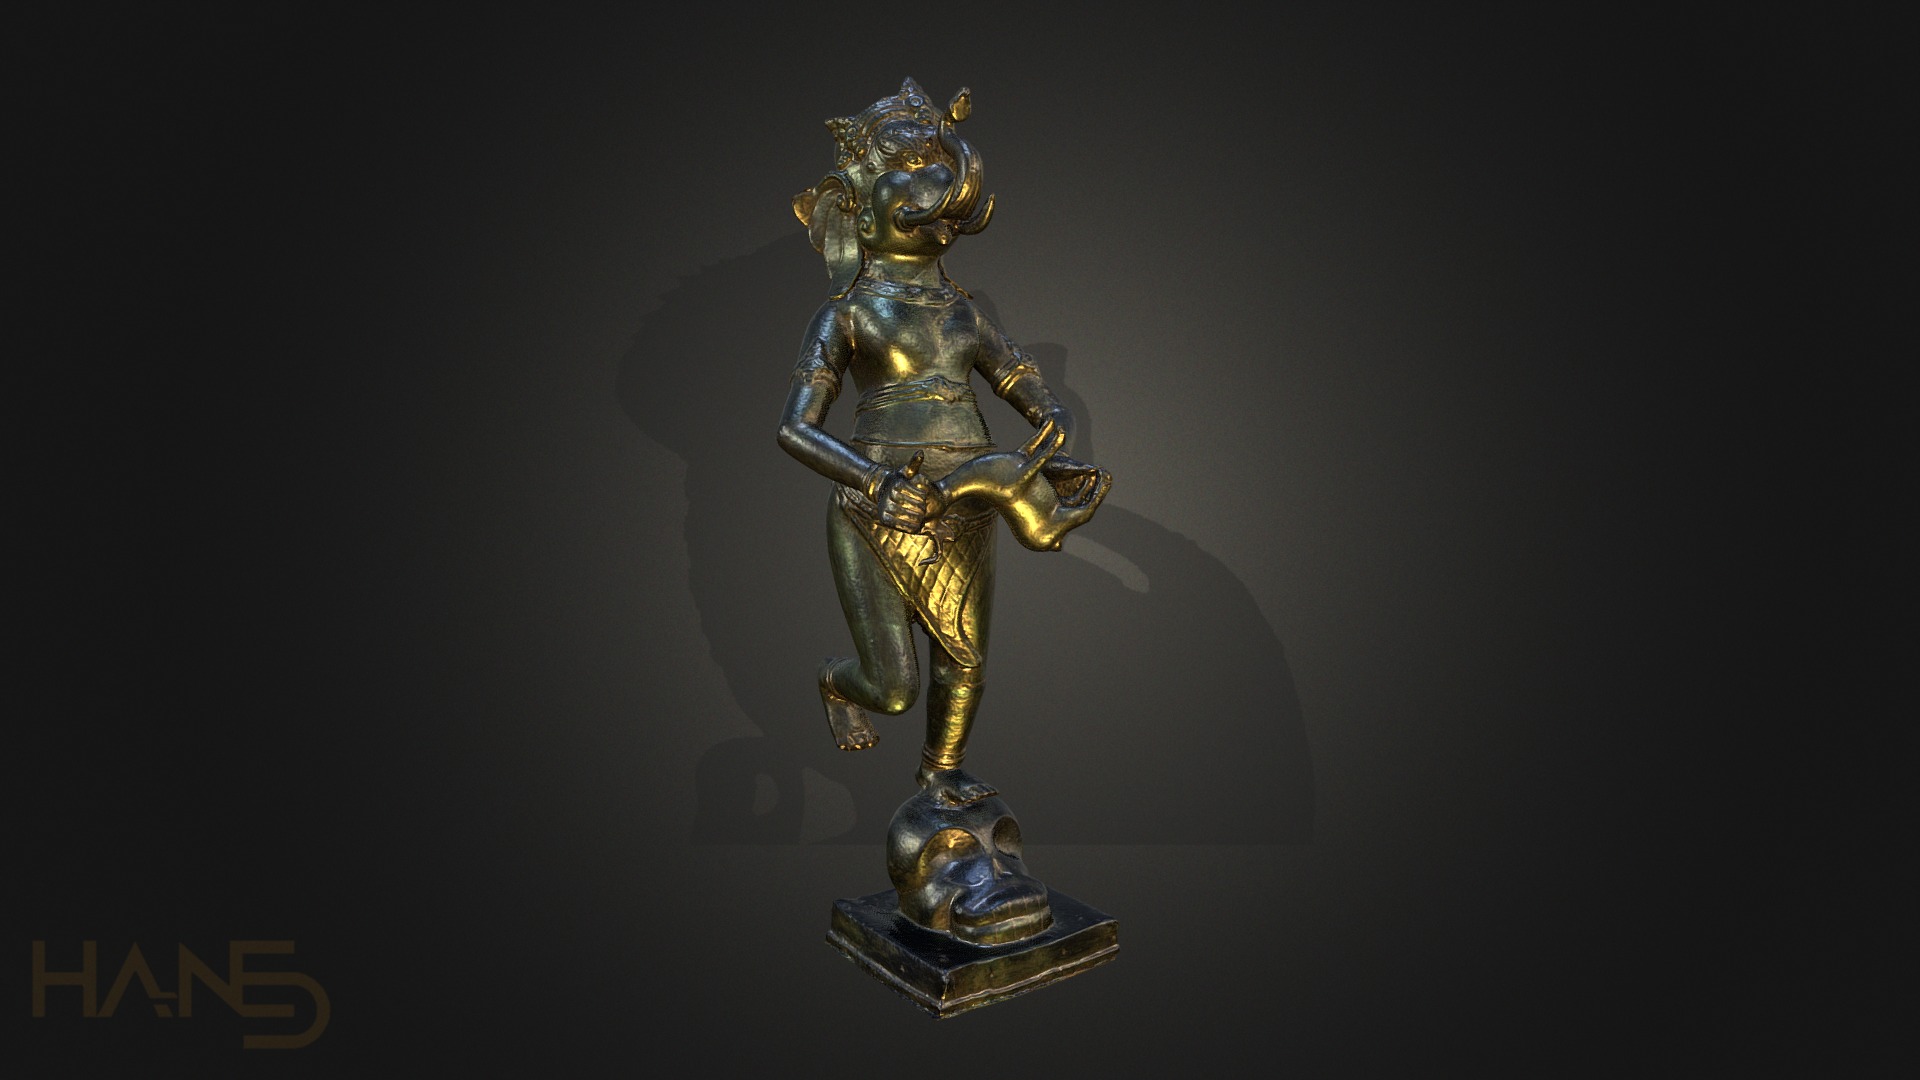 Ganesha with two arms, holding a sacred deer and standing on a skull. This statue has a real life height of approx. 67 cm. 

Viewing tip: hold ALT + Leftmouse button to rotate the lighting.

Software used: Agisoft Photoscan, Blender, Substance Painter. 

Mesh/Texture specs: 40K triangles. The model in the preview has a 2K Metal/Roughness PBR textureset (Basecolor, Metal, Roughness, AO and Normal). A 4K full textureset and the original highpoly mesh and uncompressed 8K basecolor texture is included.



Follow me on Twitter | 
** Instagram | Artstation**



Rendered with Blender Cycles, Filmic color management. 


Also, check out my other metal Ganesha Statue 3d model